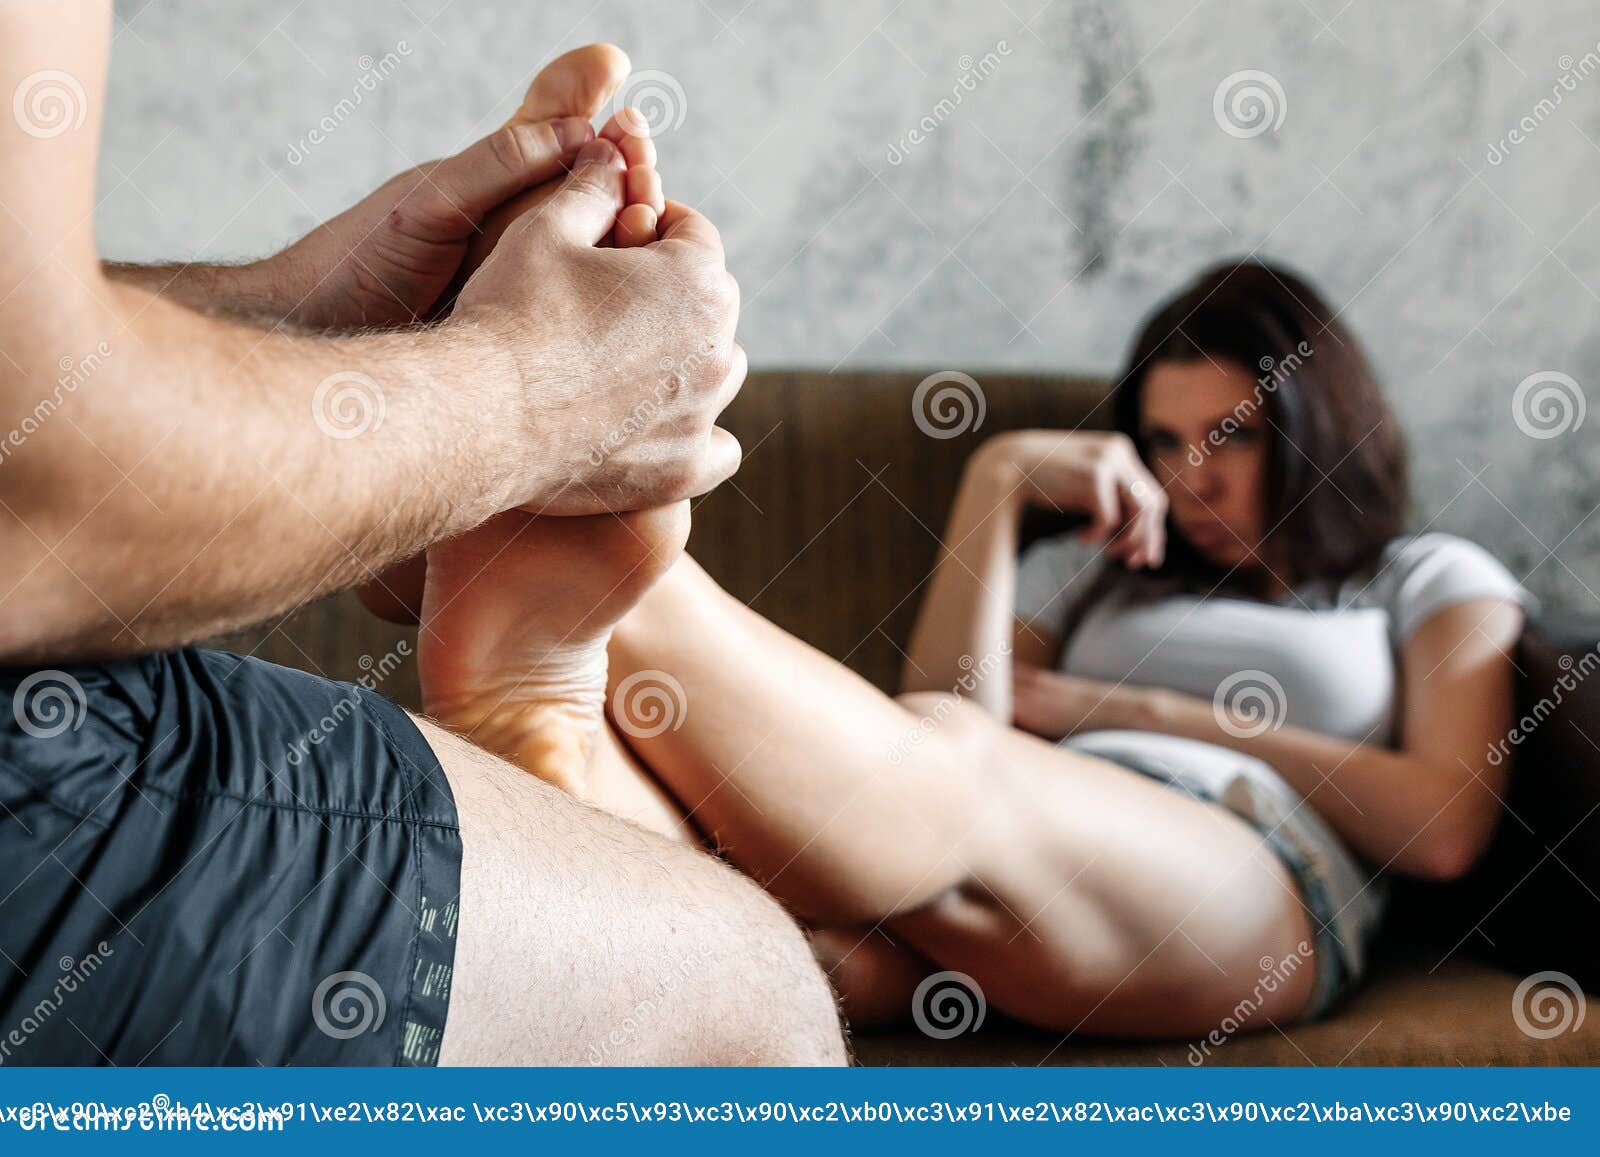 Close-up of Female Legs Receiving a Foot Massage from Her Husband